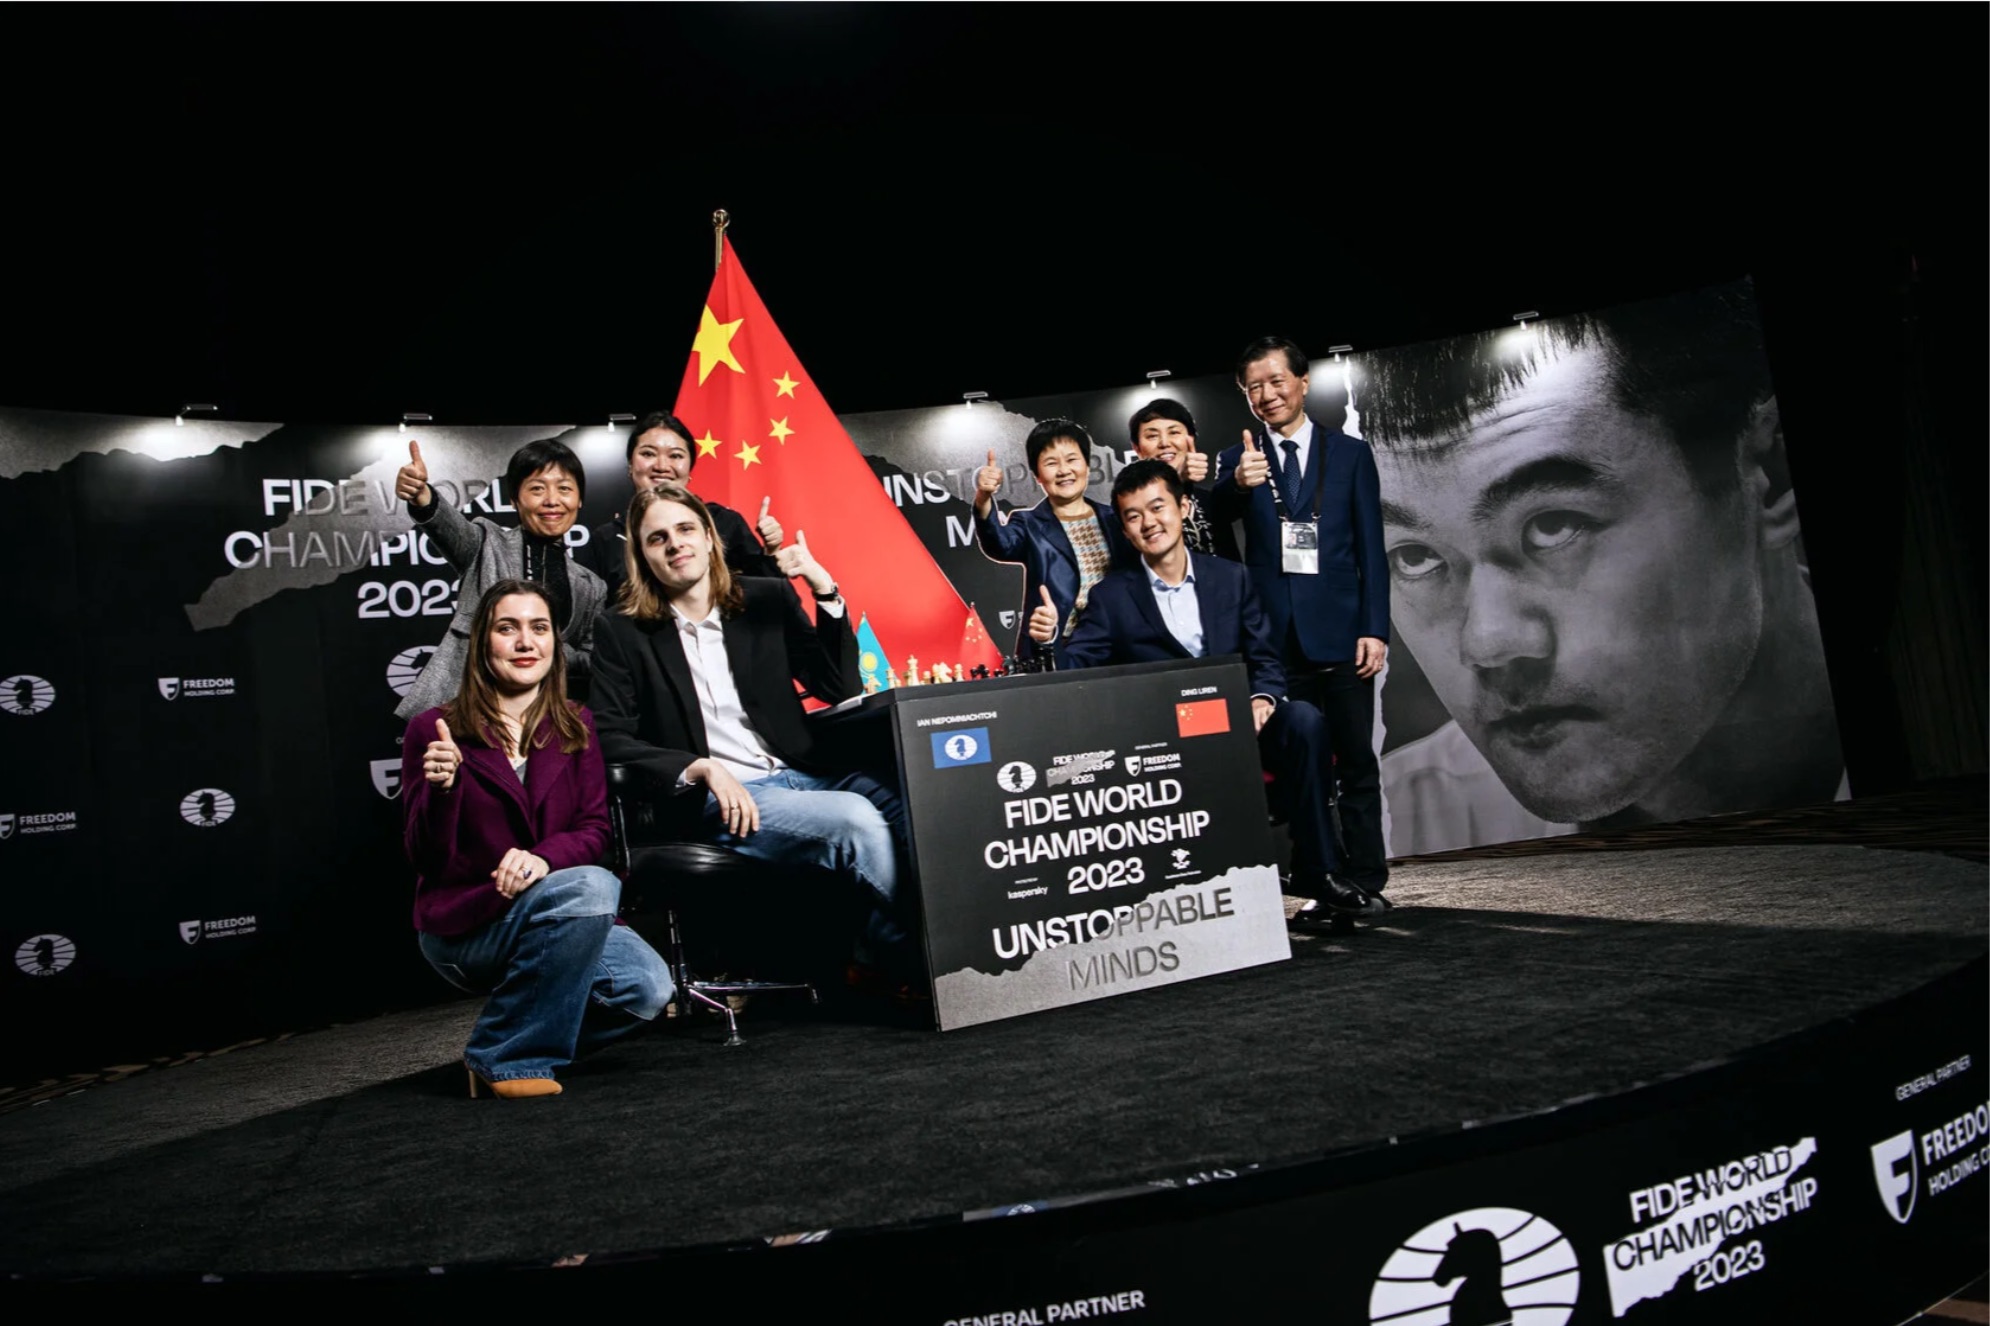 Ding Liren becomes the 17th World Chess Champion